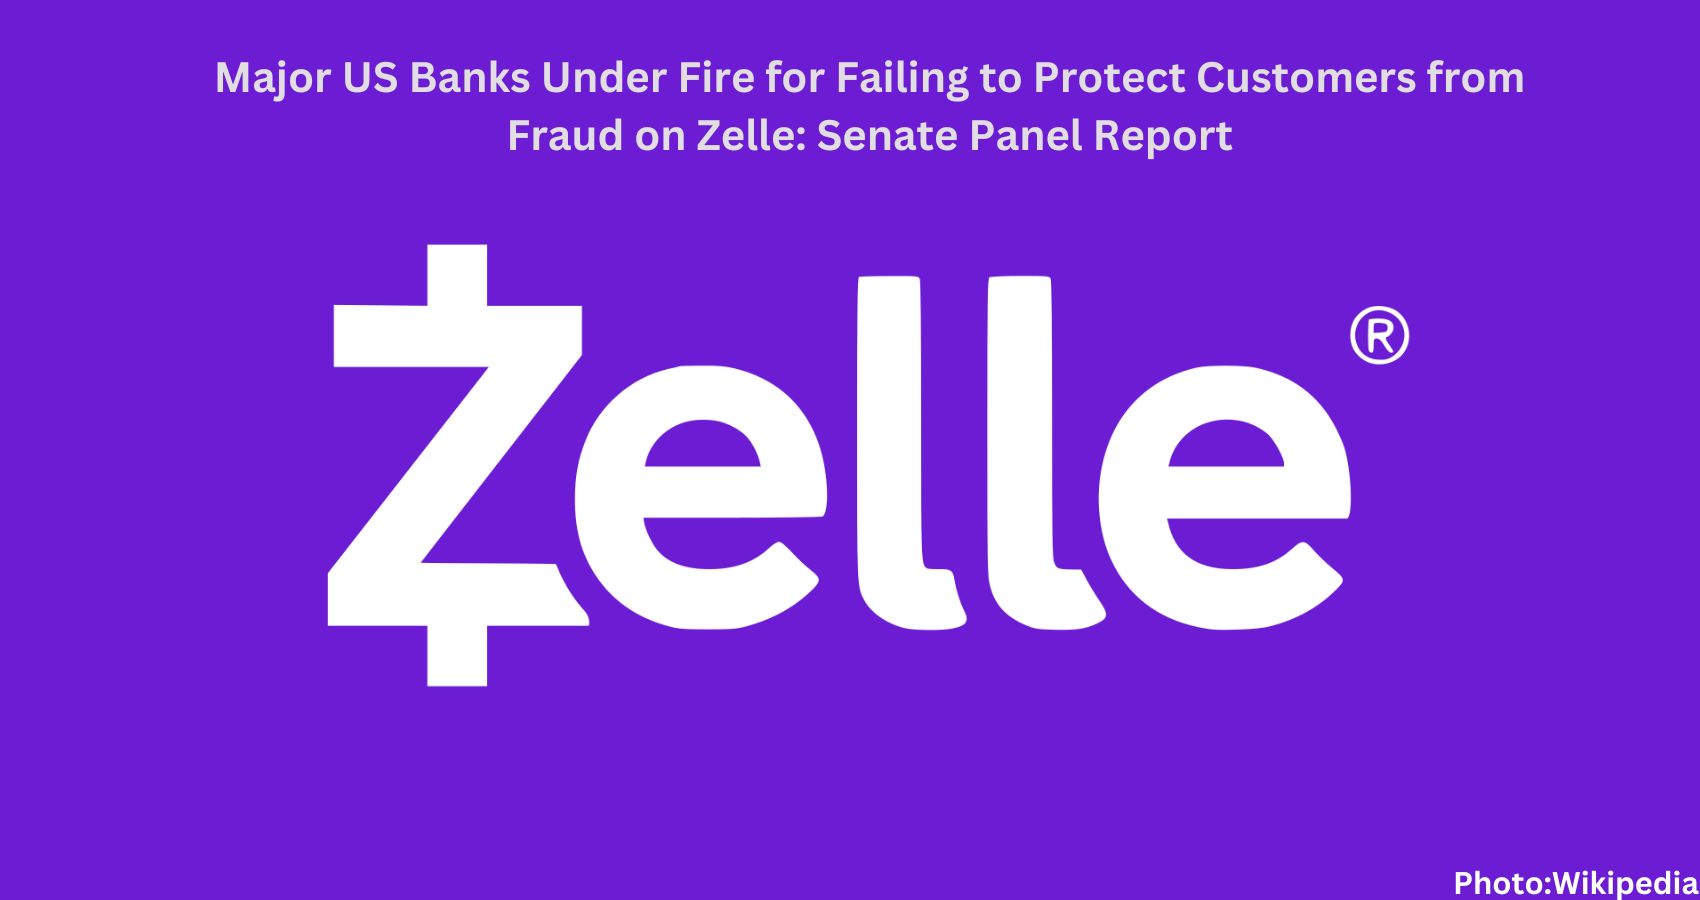 Major US Banks Under Fire for Failing to Protect Customers from Fraud on Zelle: Senate Panel Report